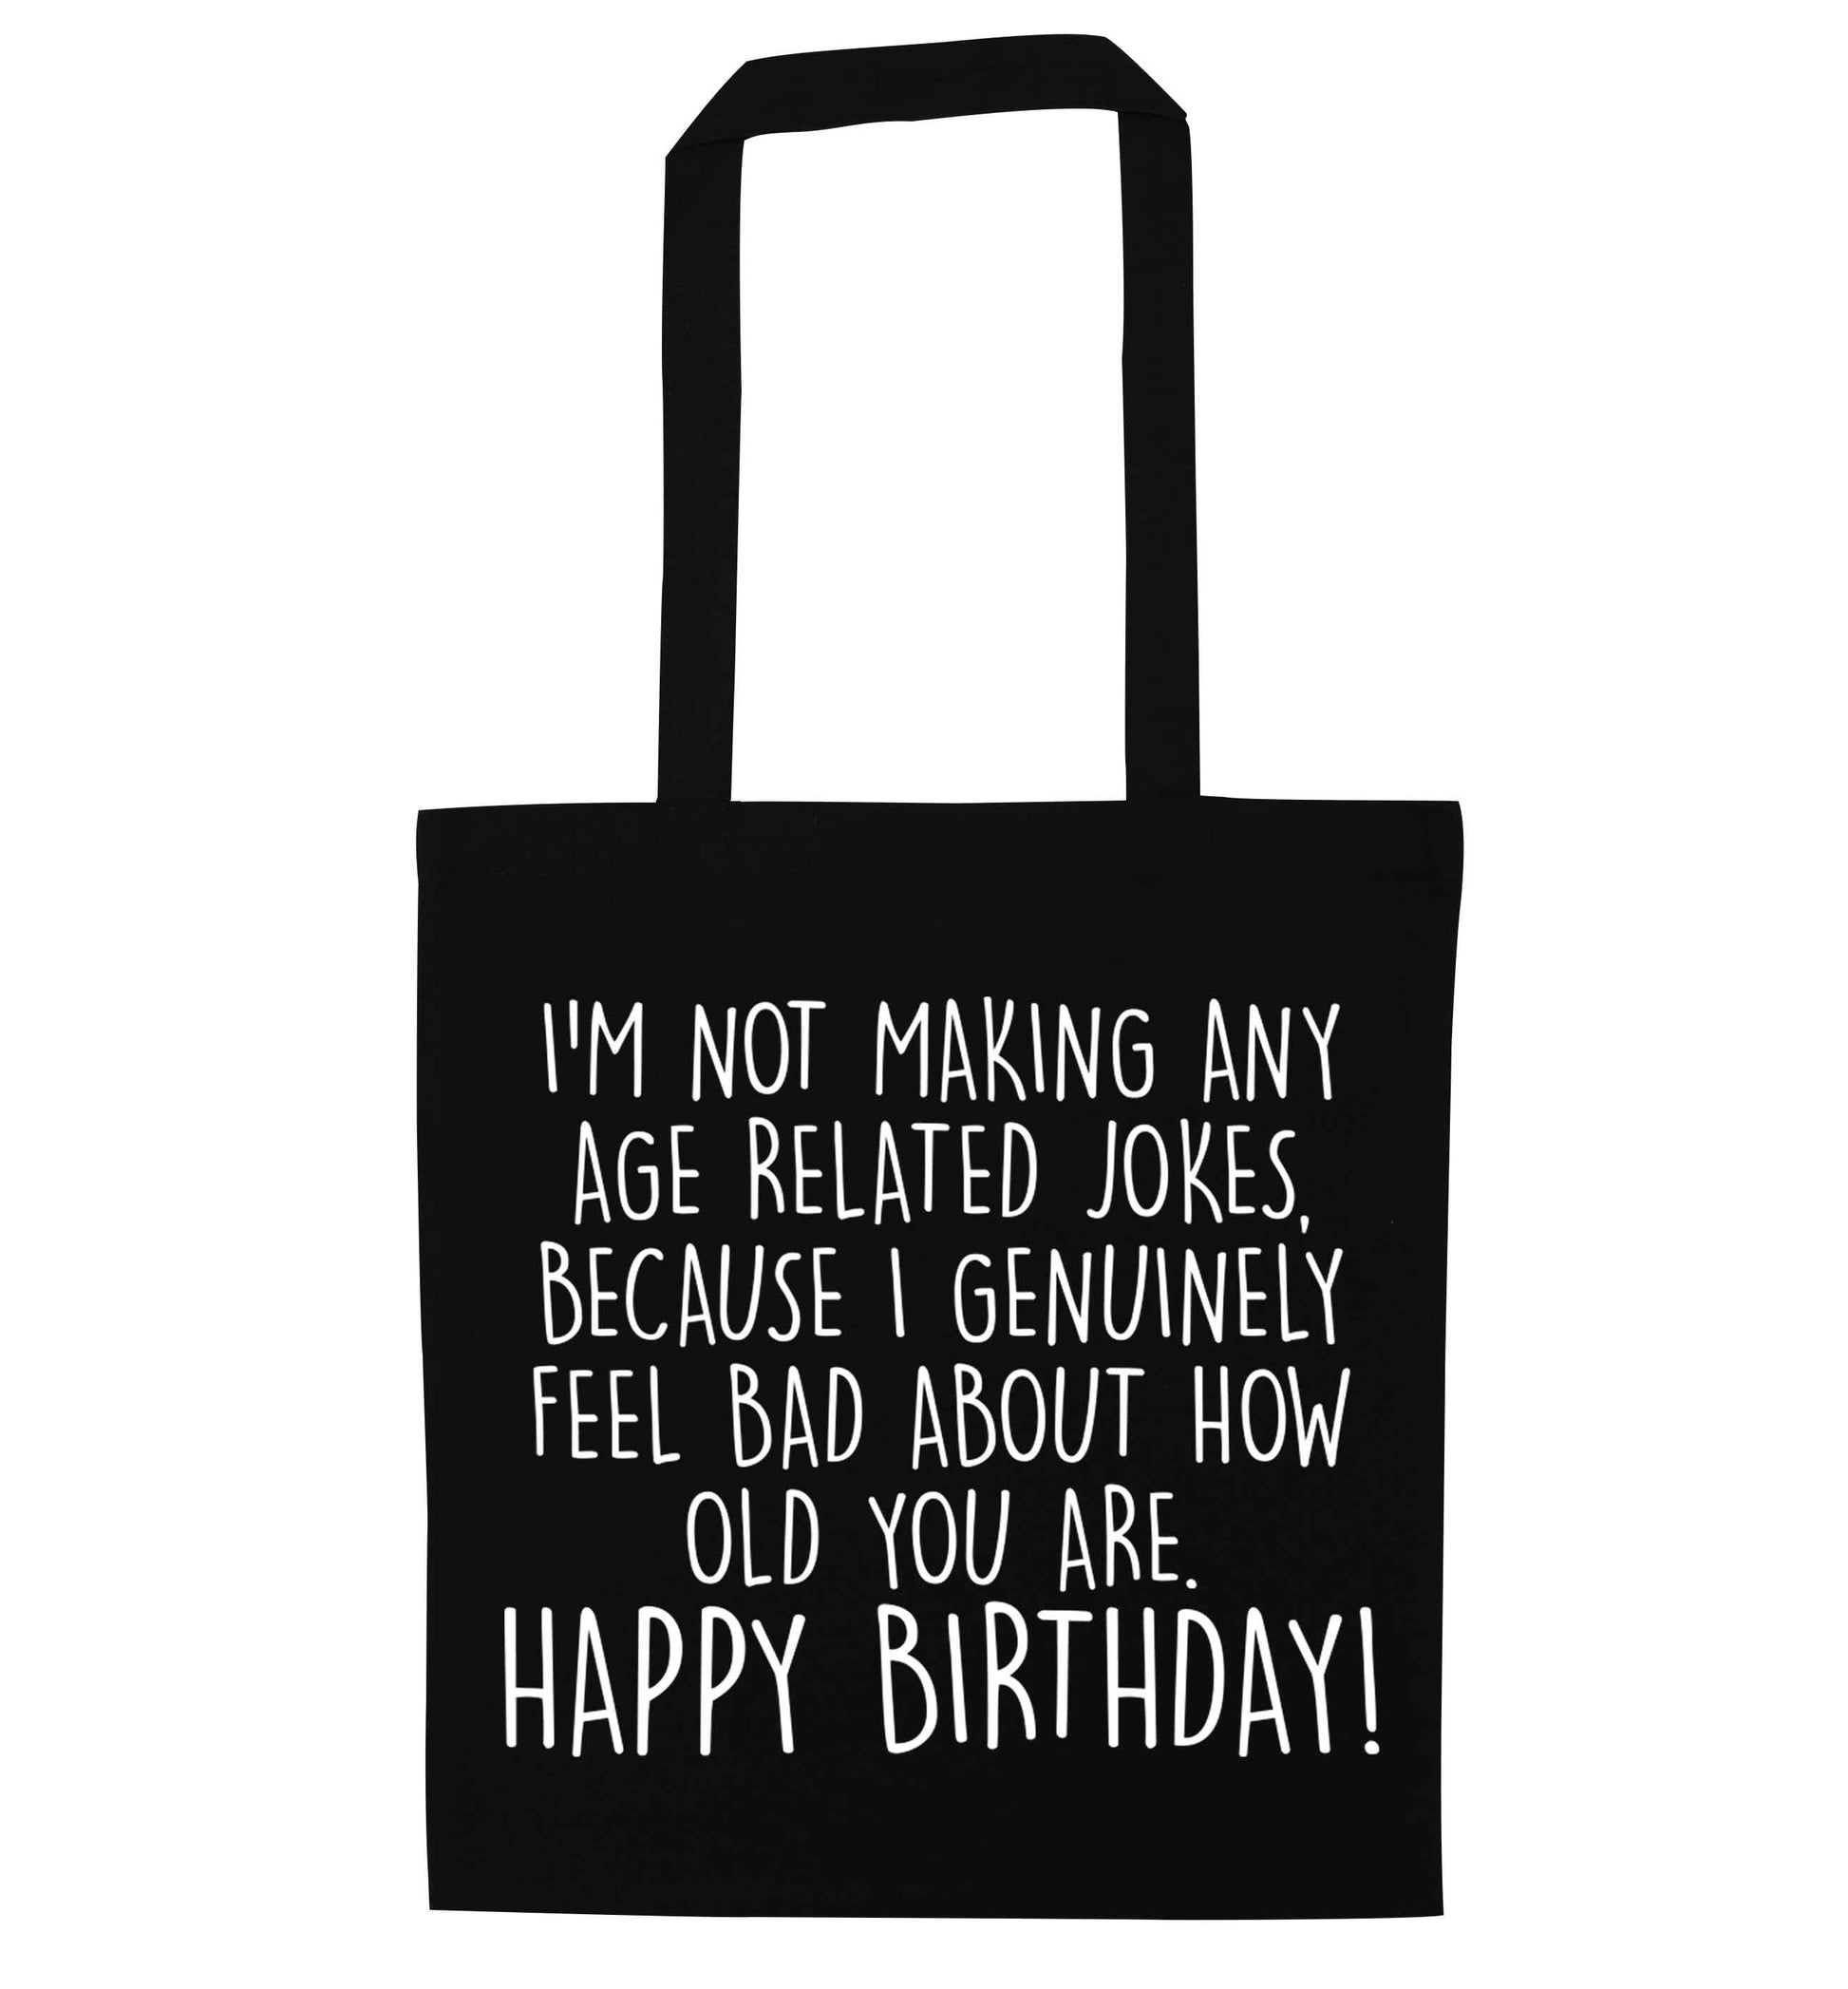 I'm not making any age related jokes because I genuinely feel bad for how old you are black tote bag